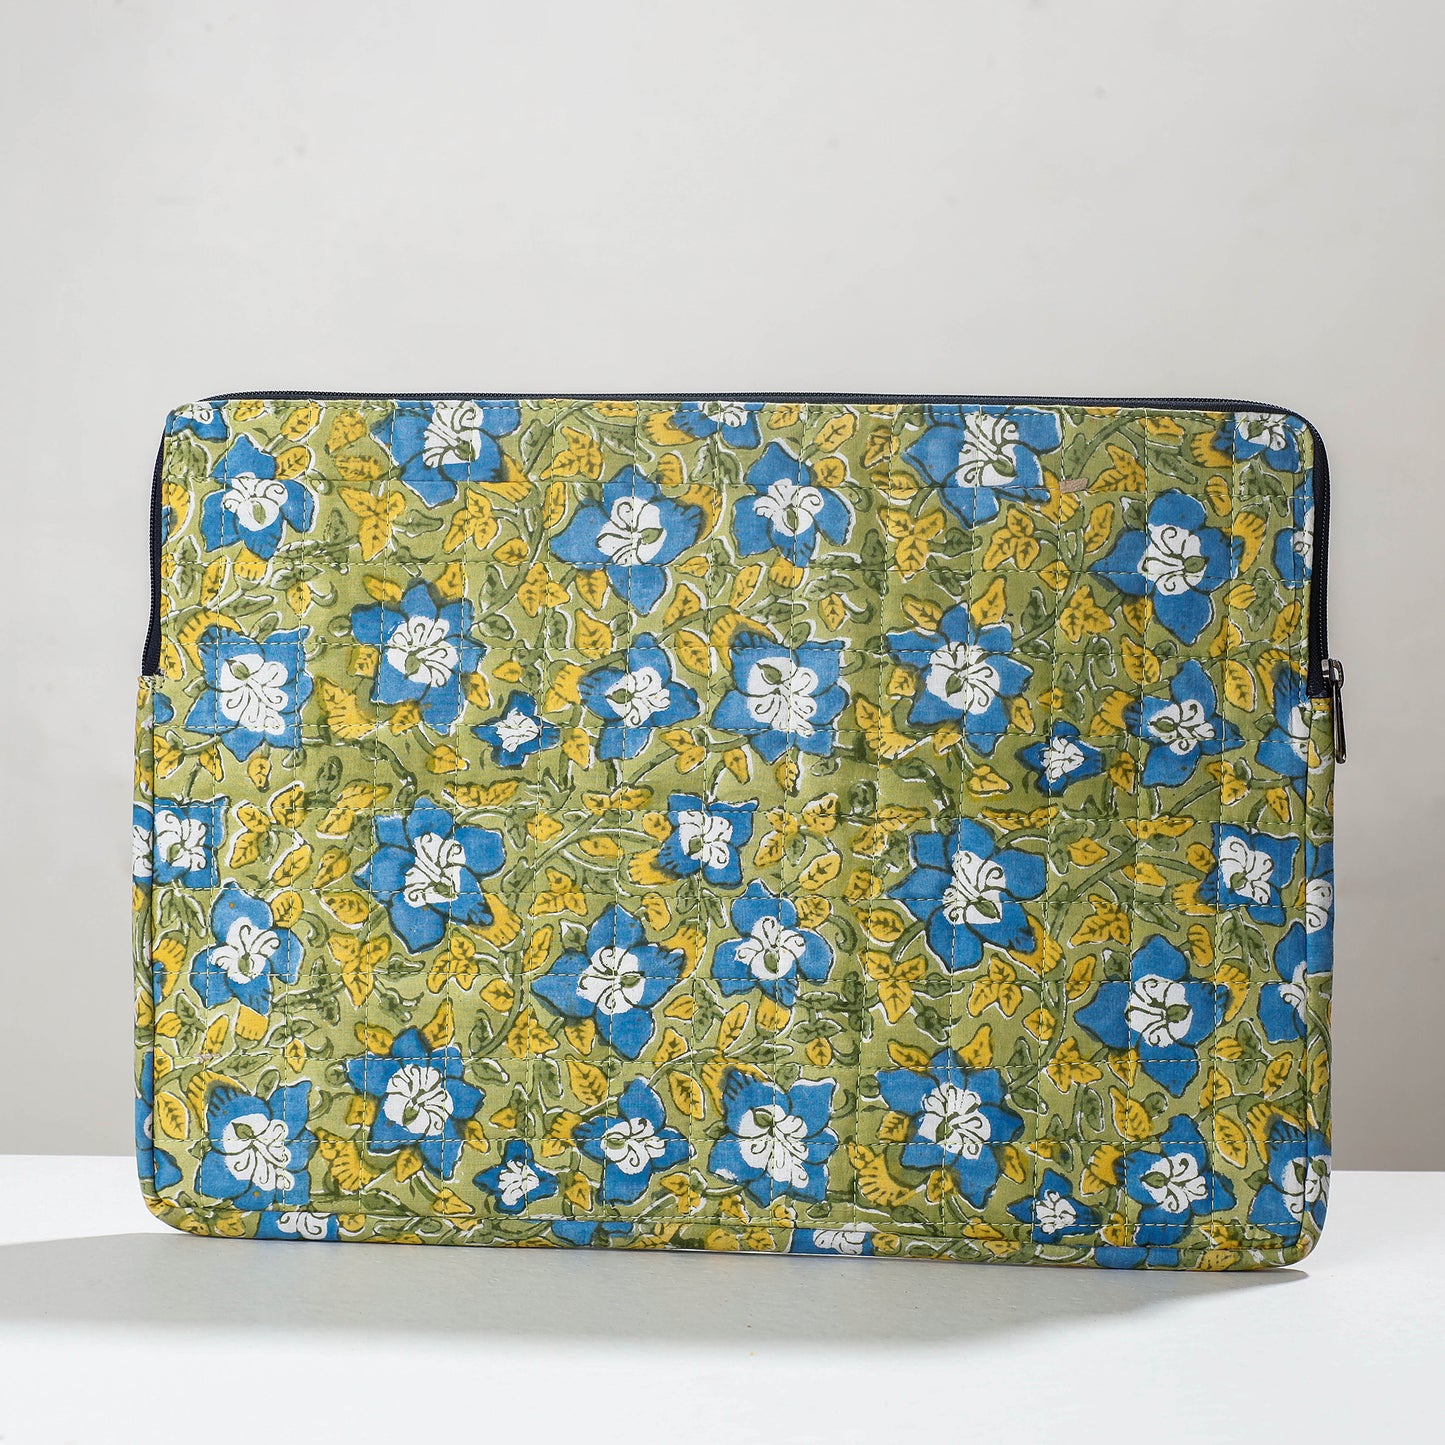 Handcrafted Block Printing Quilted Laptop Sleeve (12 x 17 in)